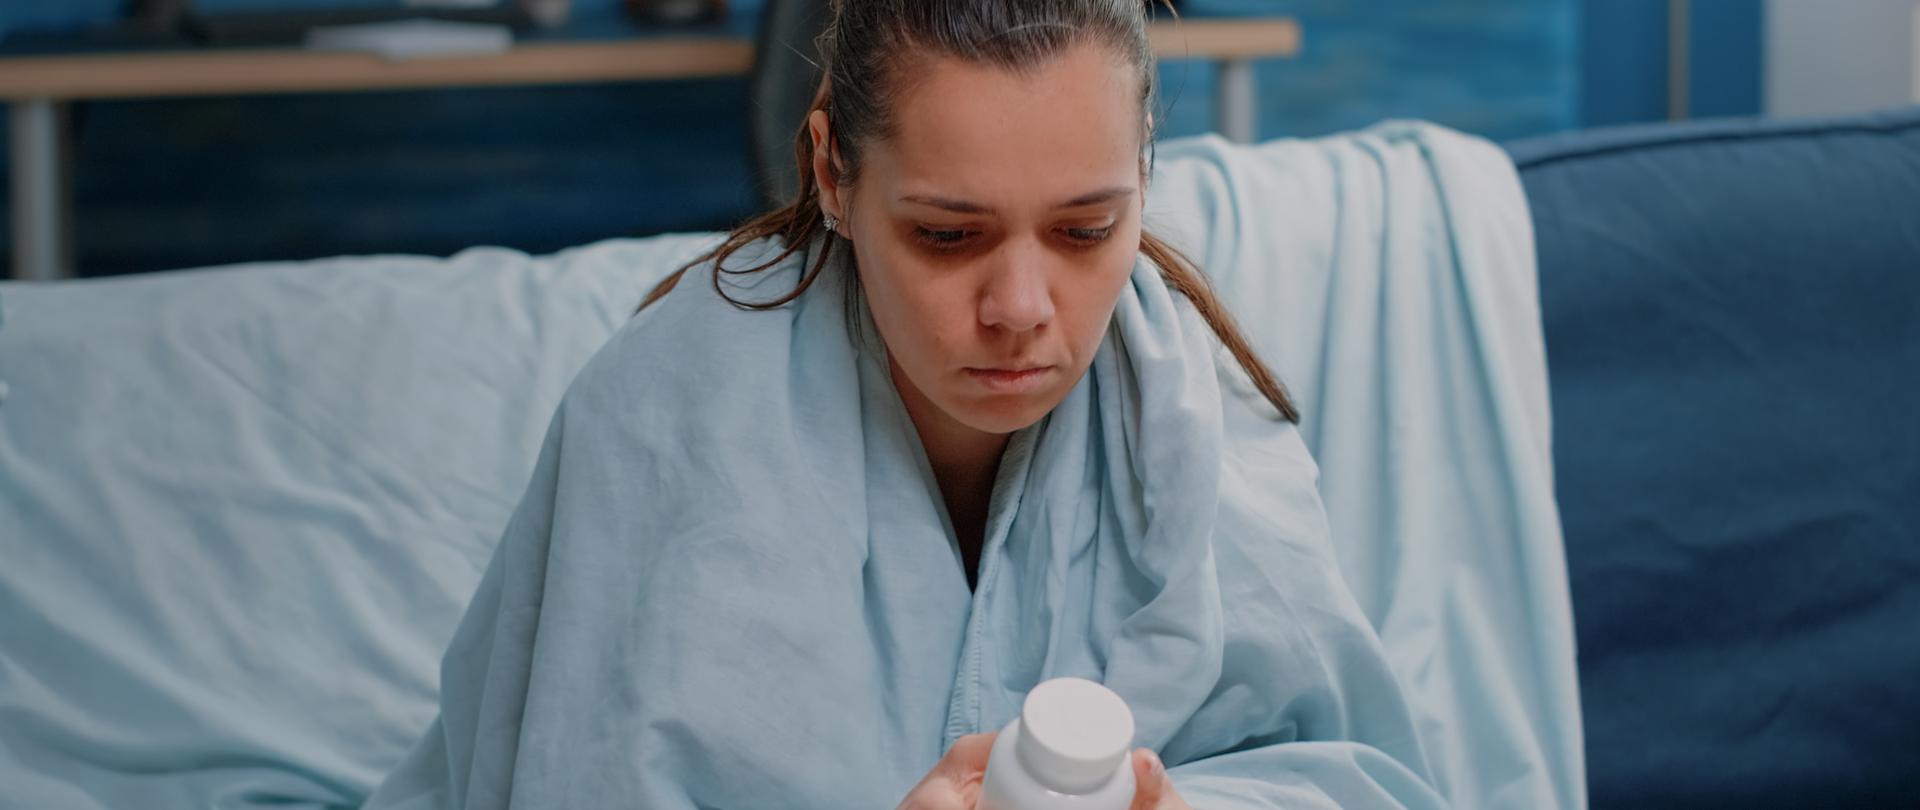 Sick woman with flu holding bottle of pills and drugs, reading label of medication to cure coronavirus symptoms. Person looking at flask of medicament for prescription treatment.